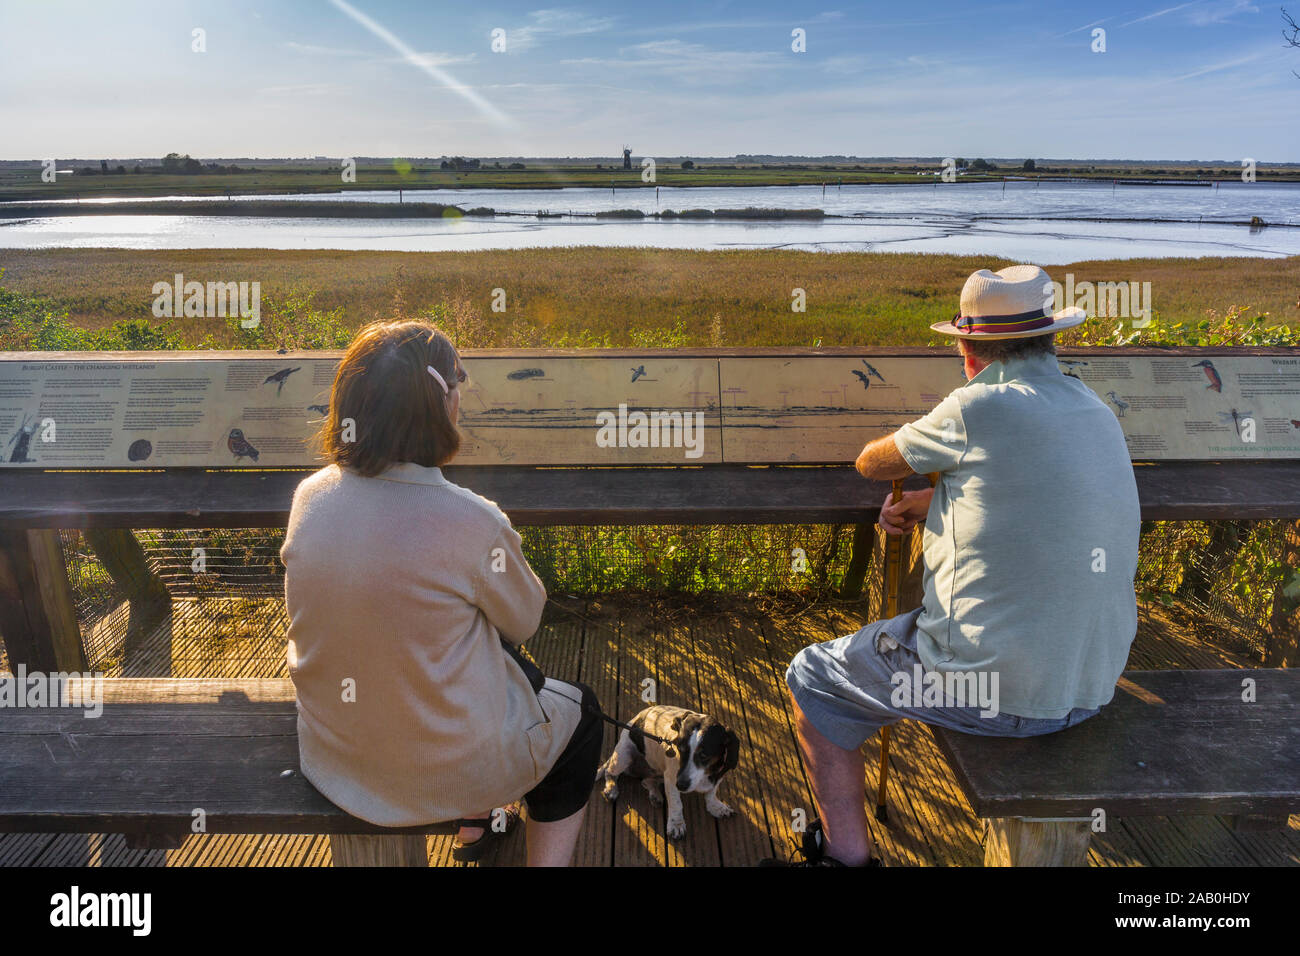 Walkers pause to admire the view at Burgh Castle, Norfolk, UK, where the rivers Waveney and Yare meet part of The Norfolk Broads. Stock Photo